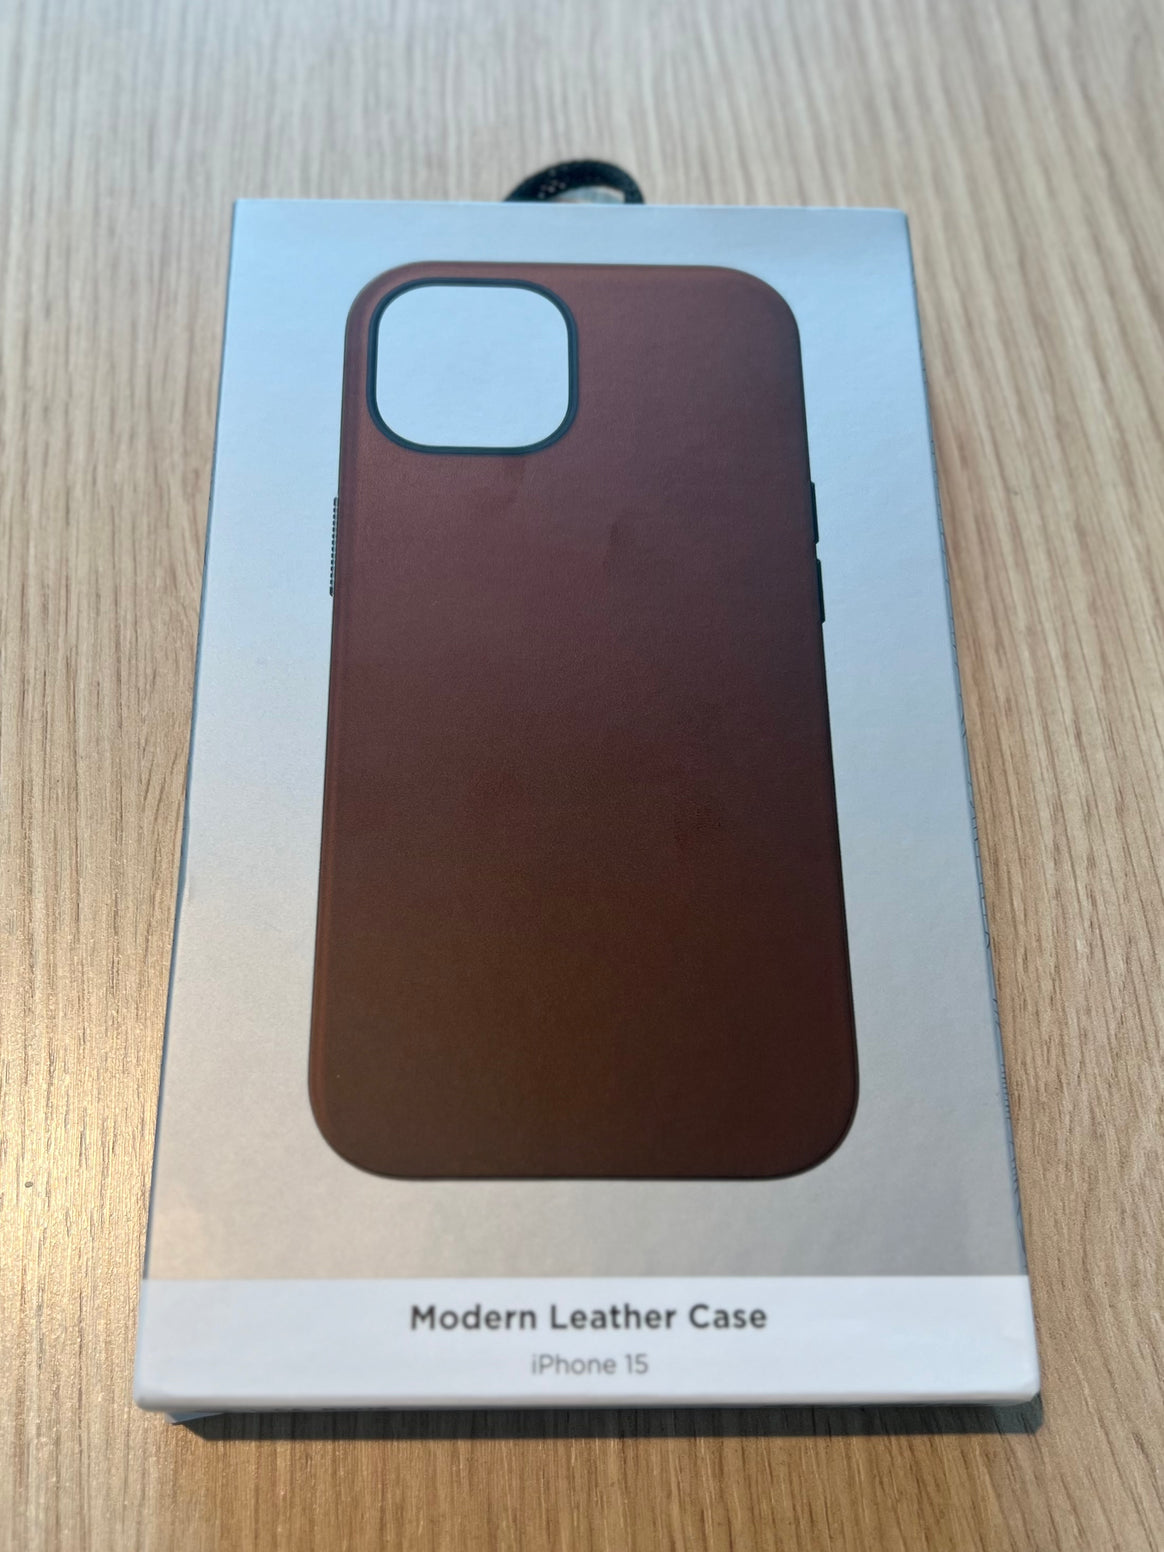 Nomad Modern Leather Case for iPhone 15 - Brown - Open Box